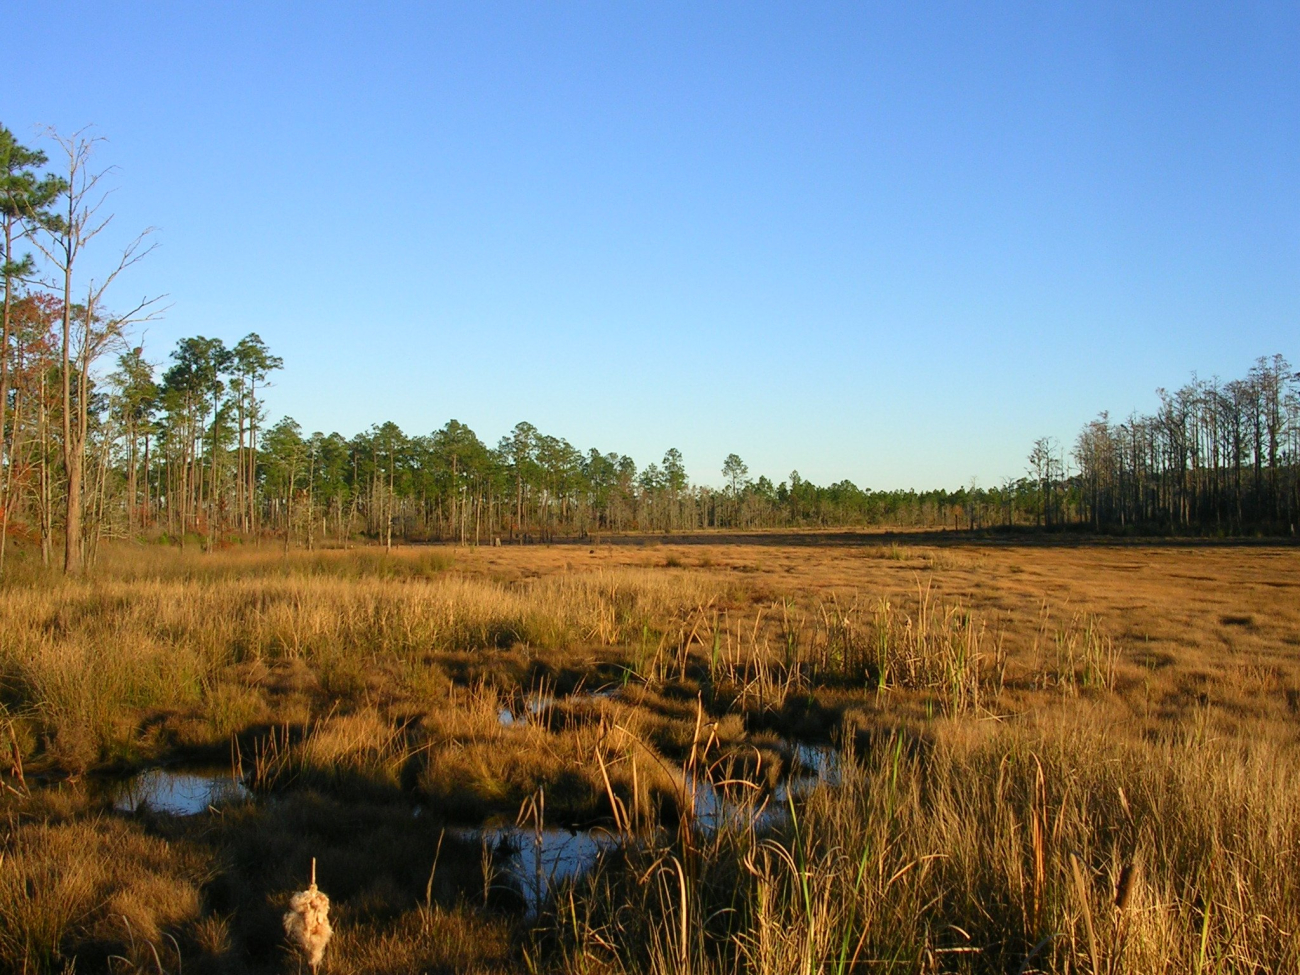 Facing south in Hawks' Marsh, a freshwater marsh within the Grand Bay NERRboundary